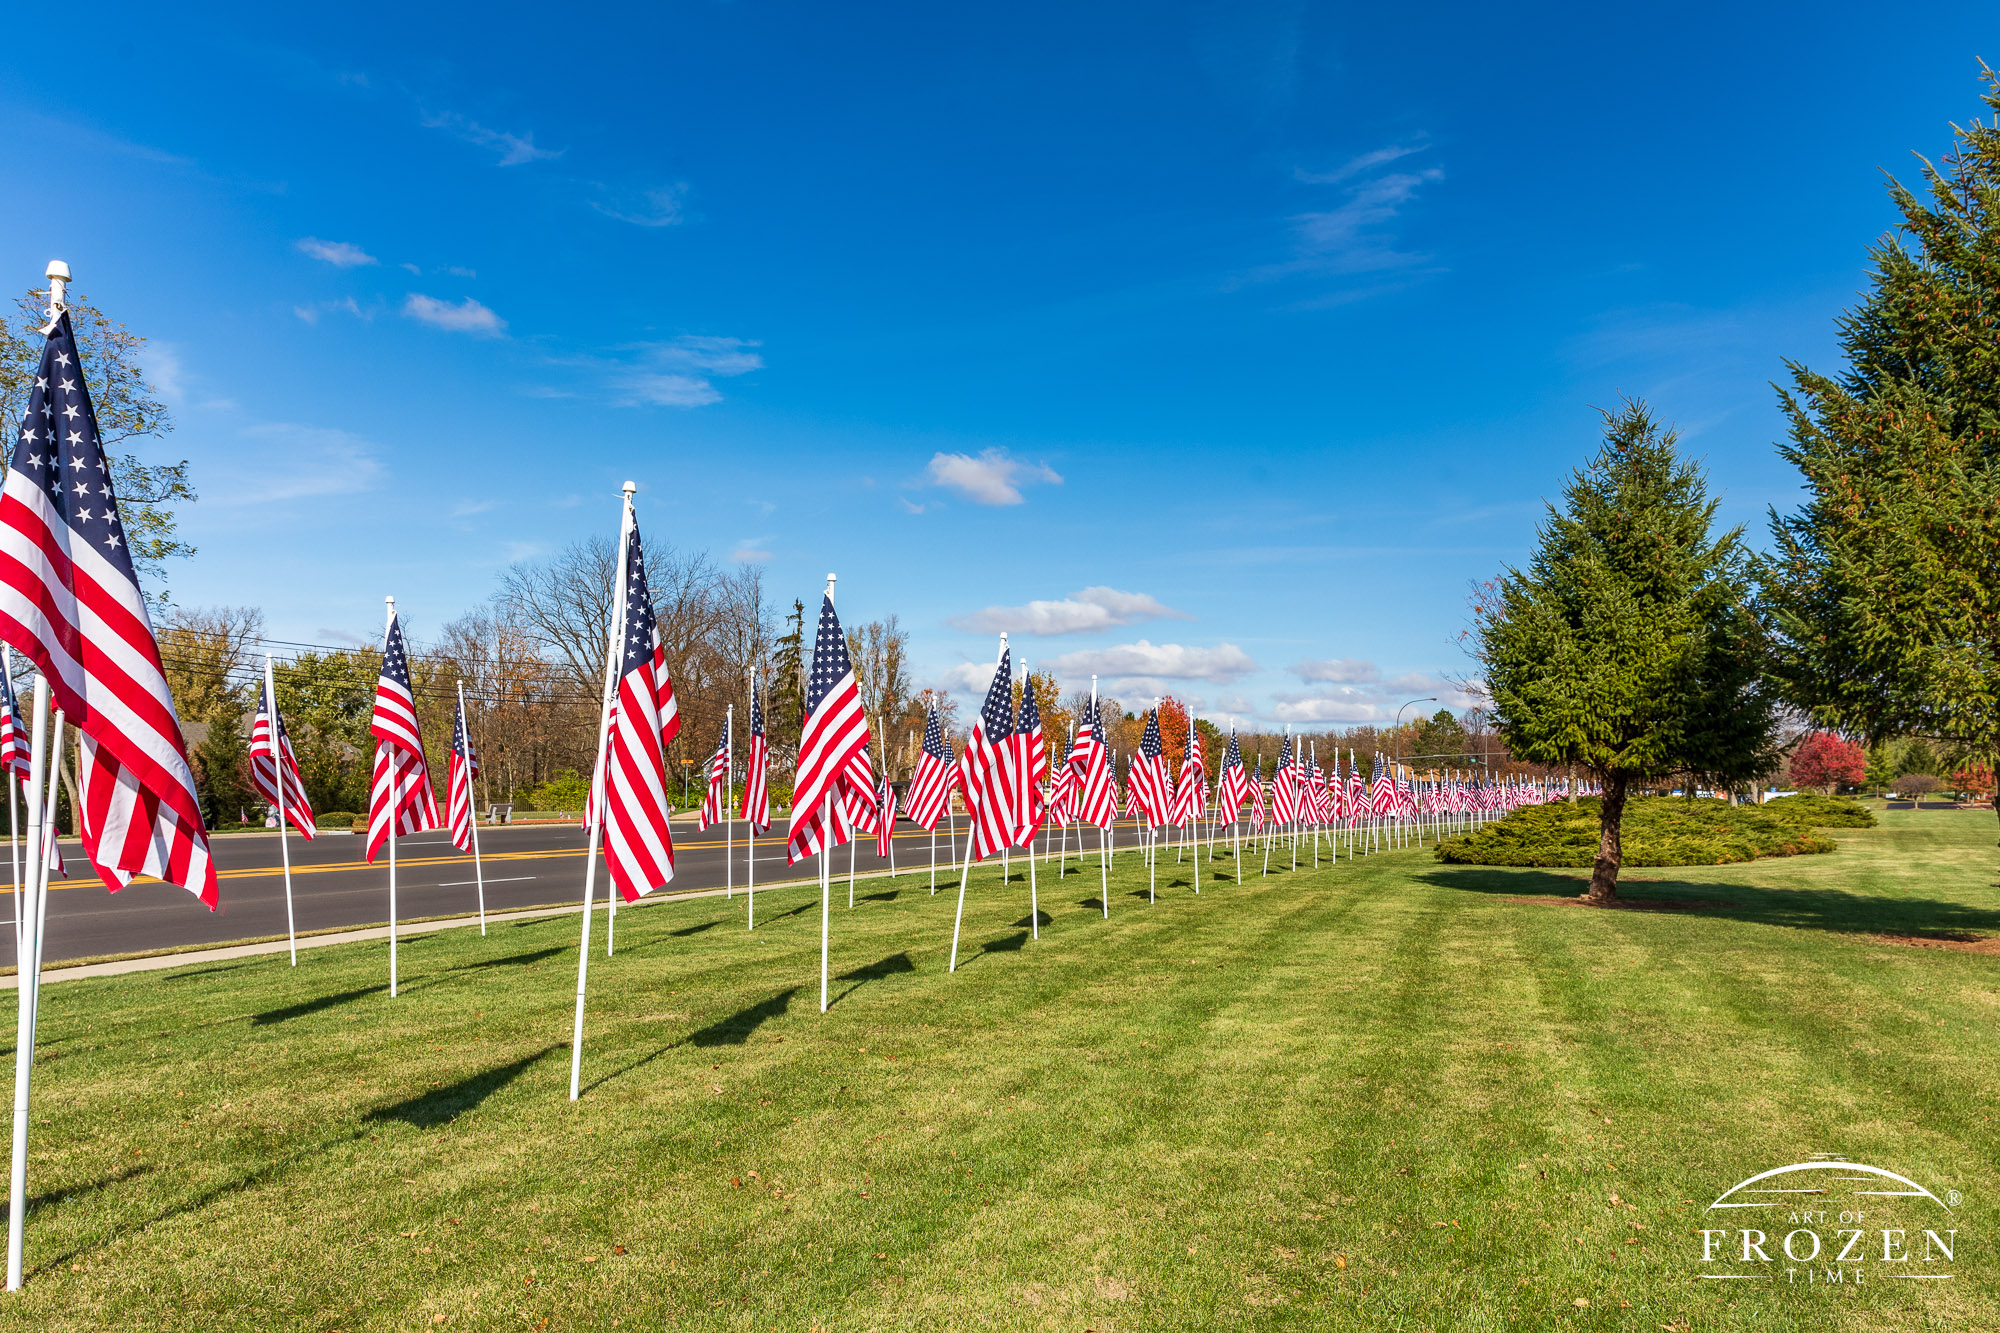 Under clear blue skies, Beavercreek shows its patriotism by setting up several hundred US Flags which on this day fluttered in the gentle breeze